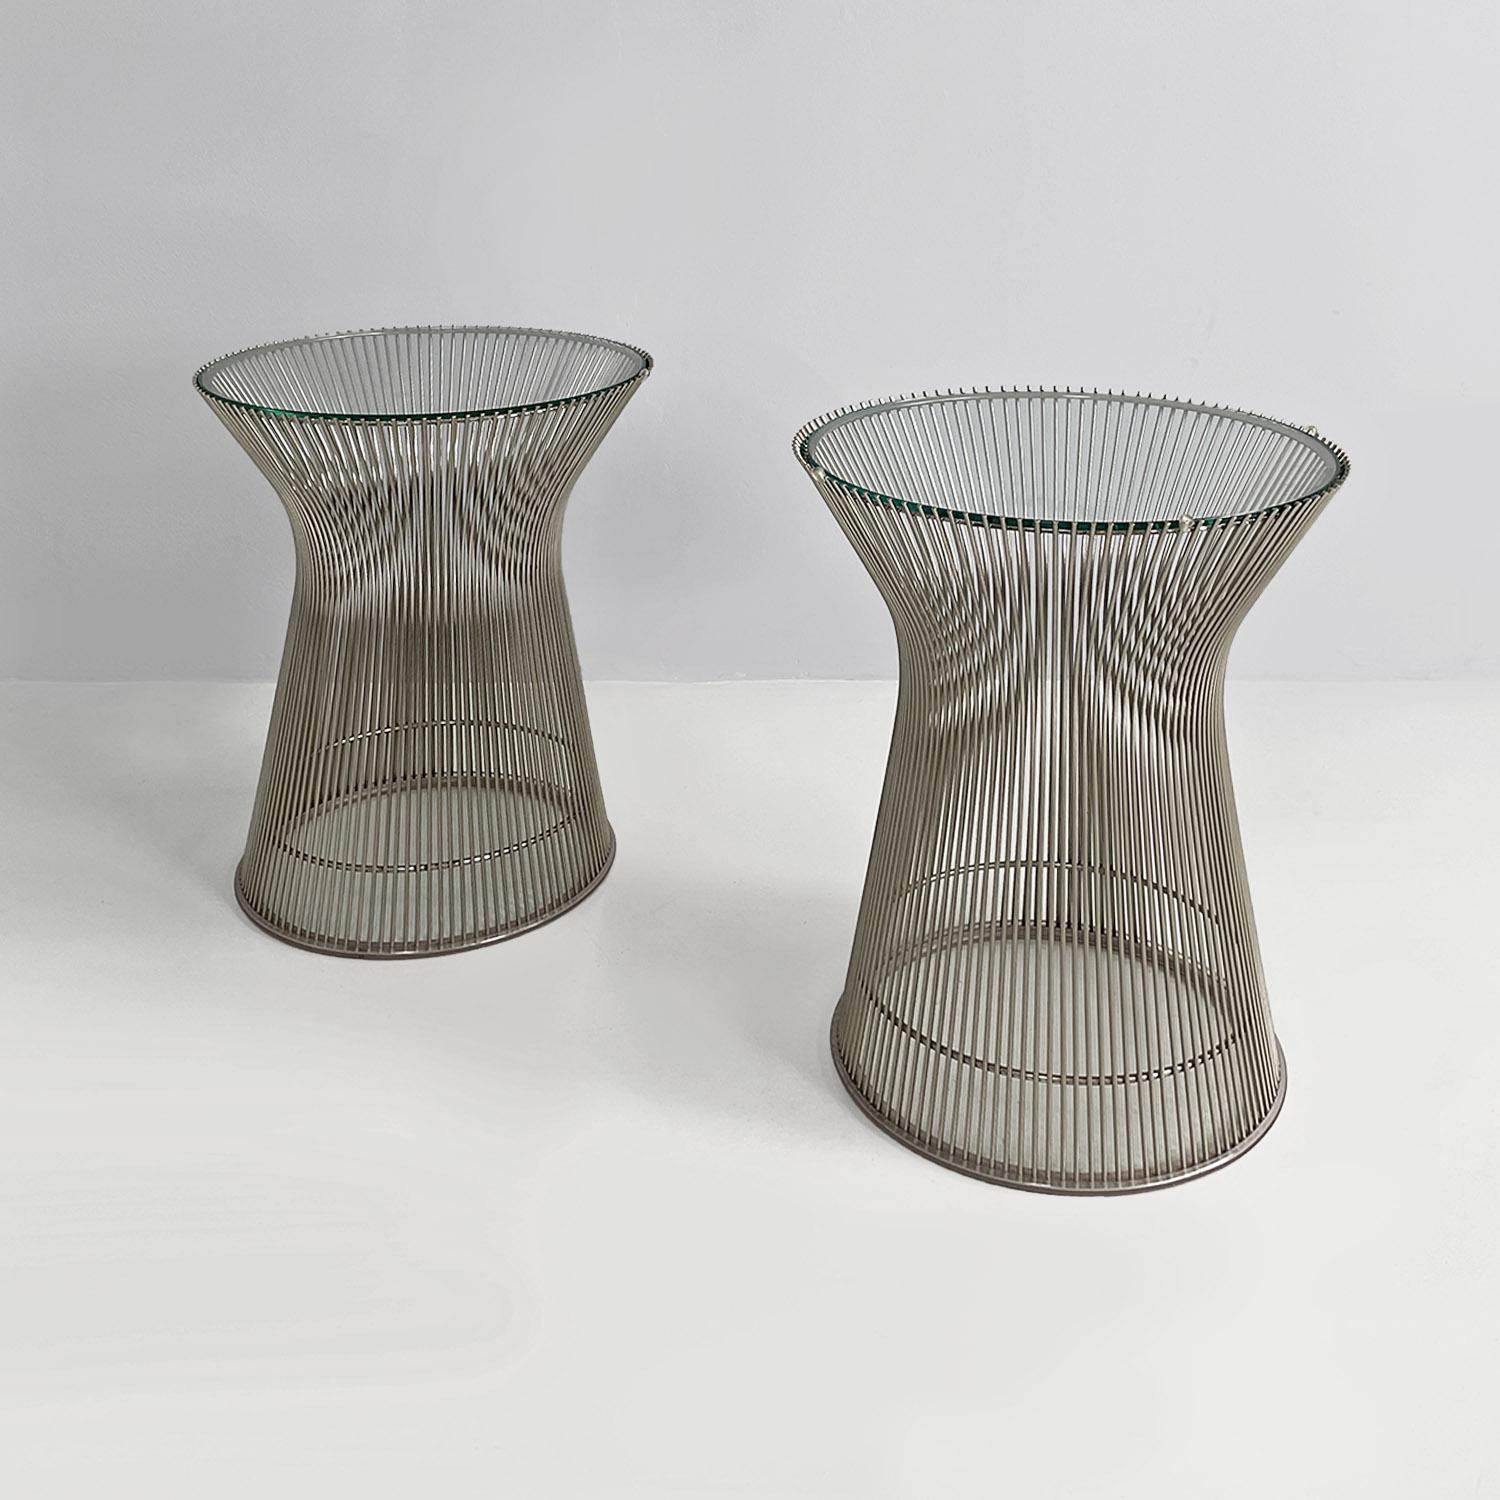 Modern American modern steel and crystal side tables by Warren Platner for Knoll, 1966